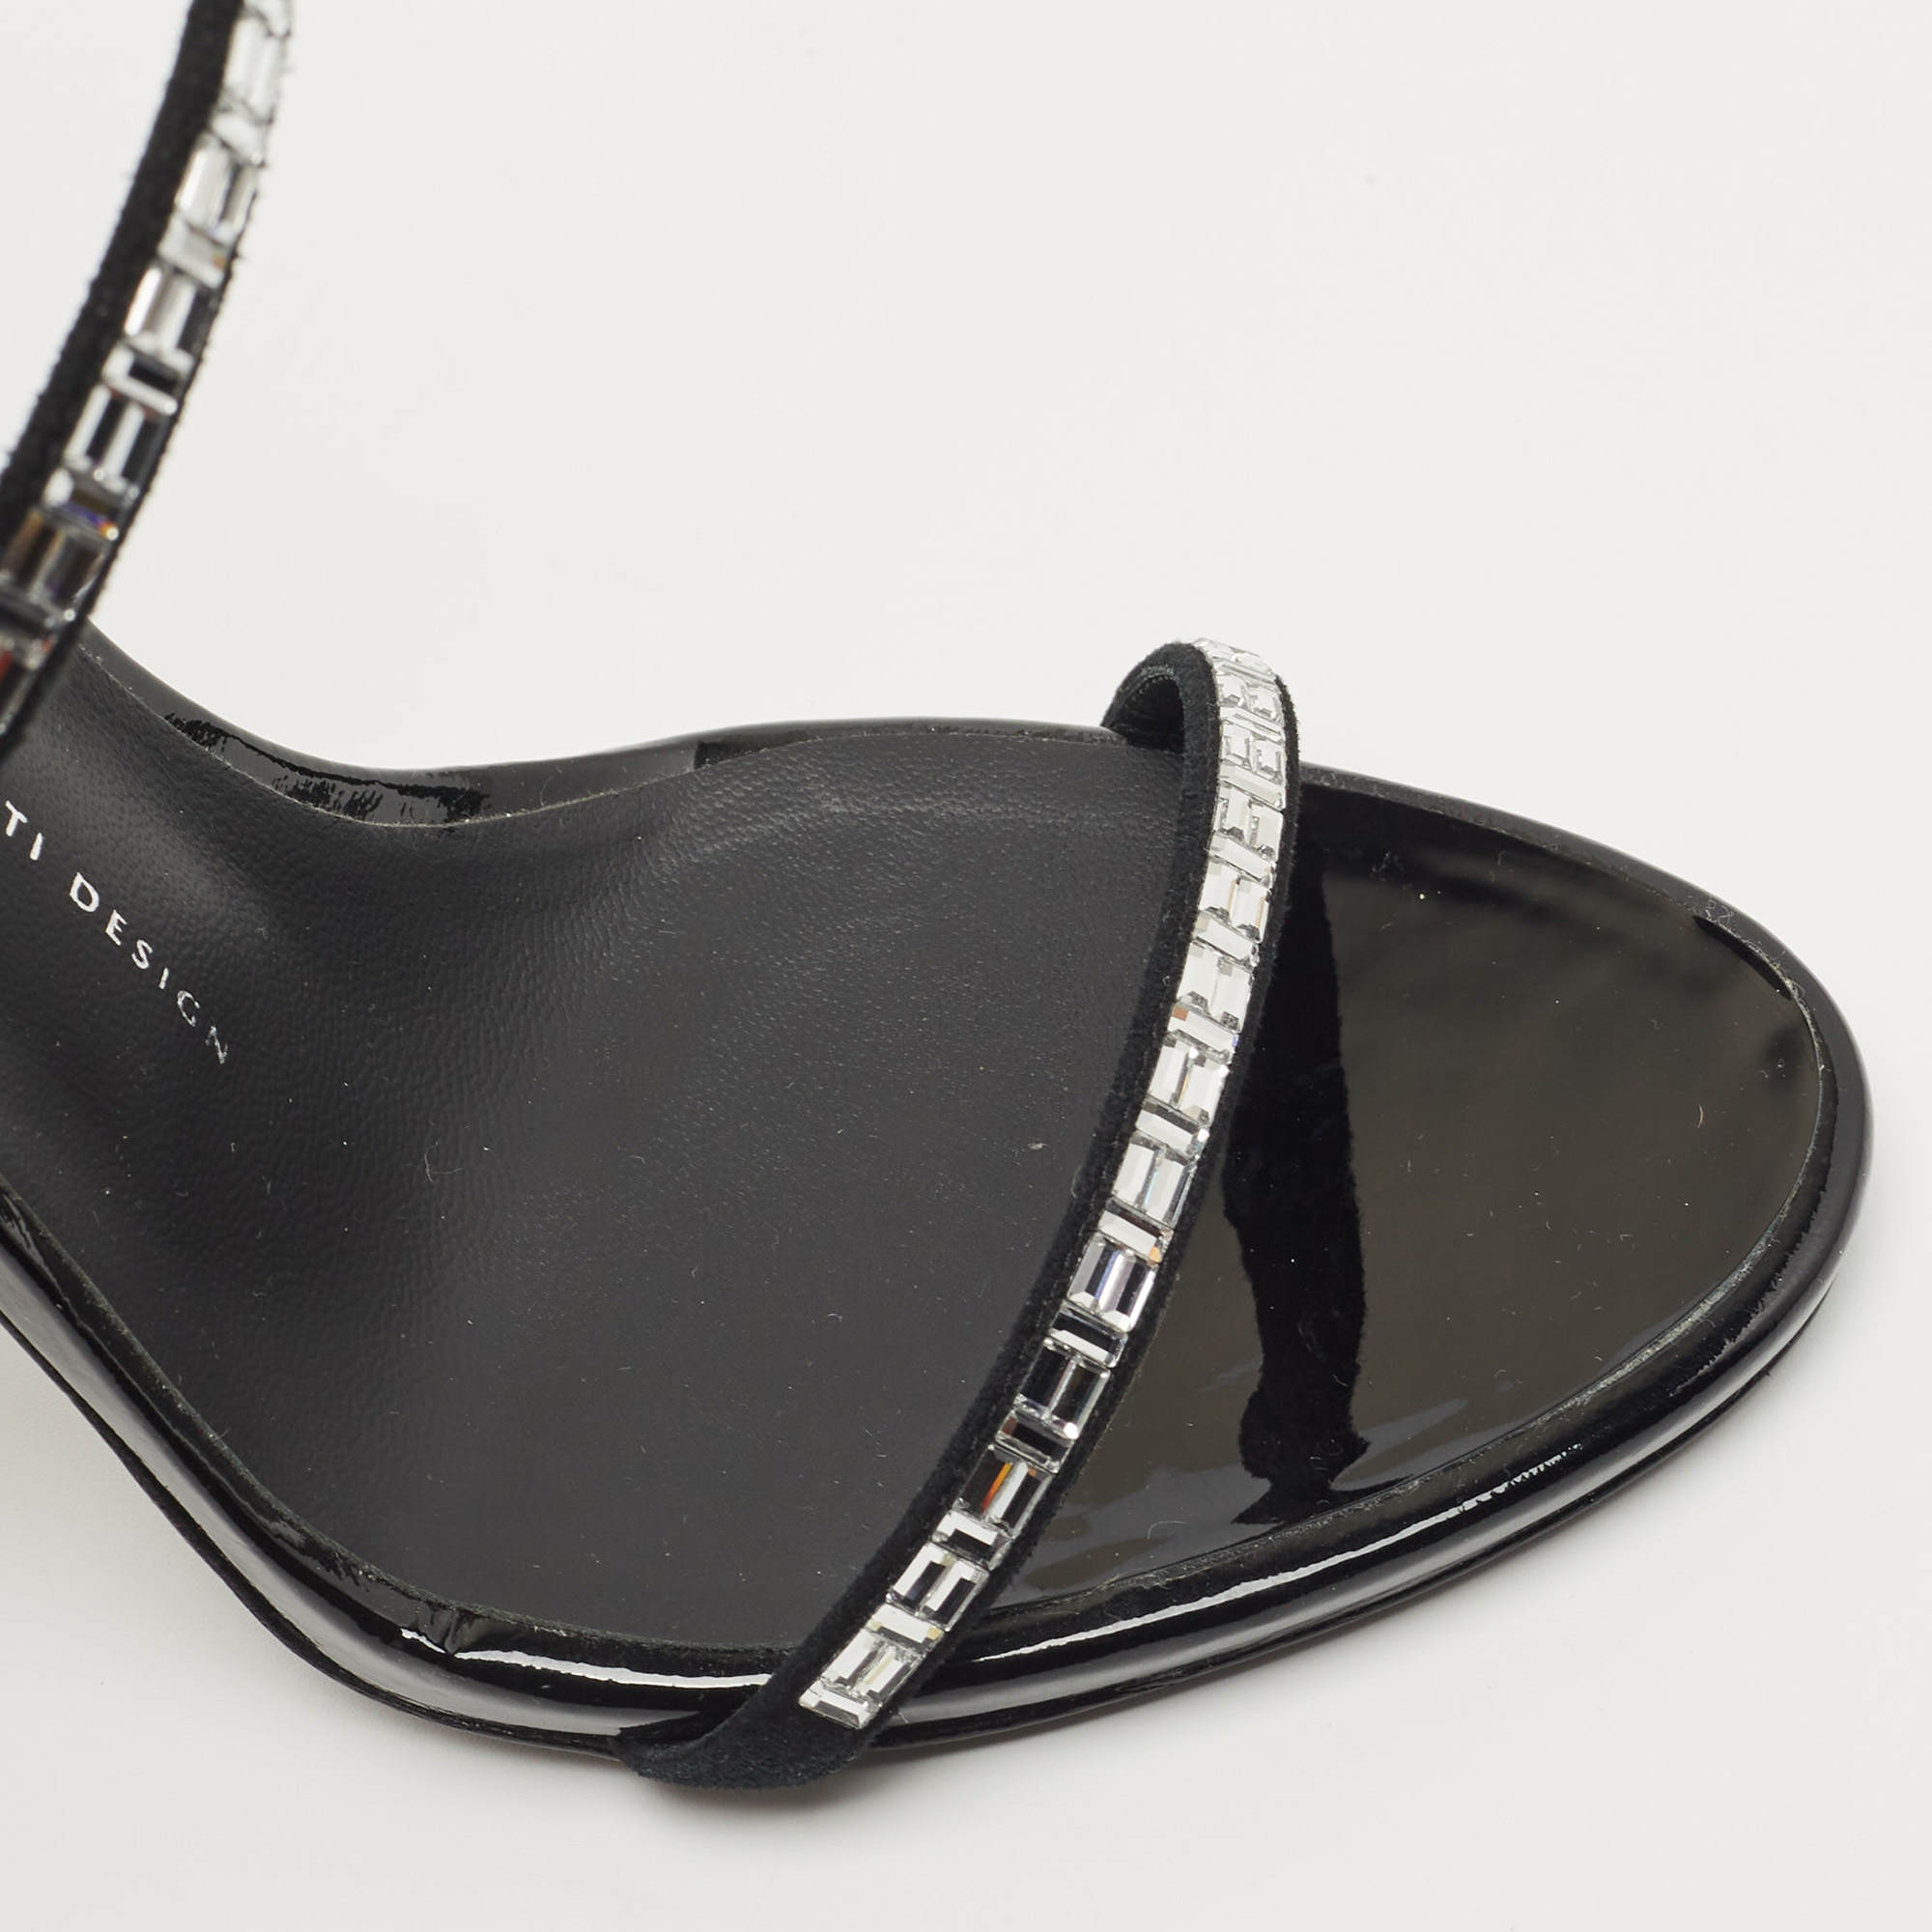 Giuseppe Zannoti Black Patent Leather And Suede Callipe Crystal Embellished Strappy Sandals Size 40